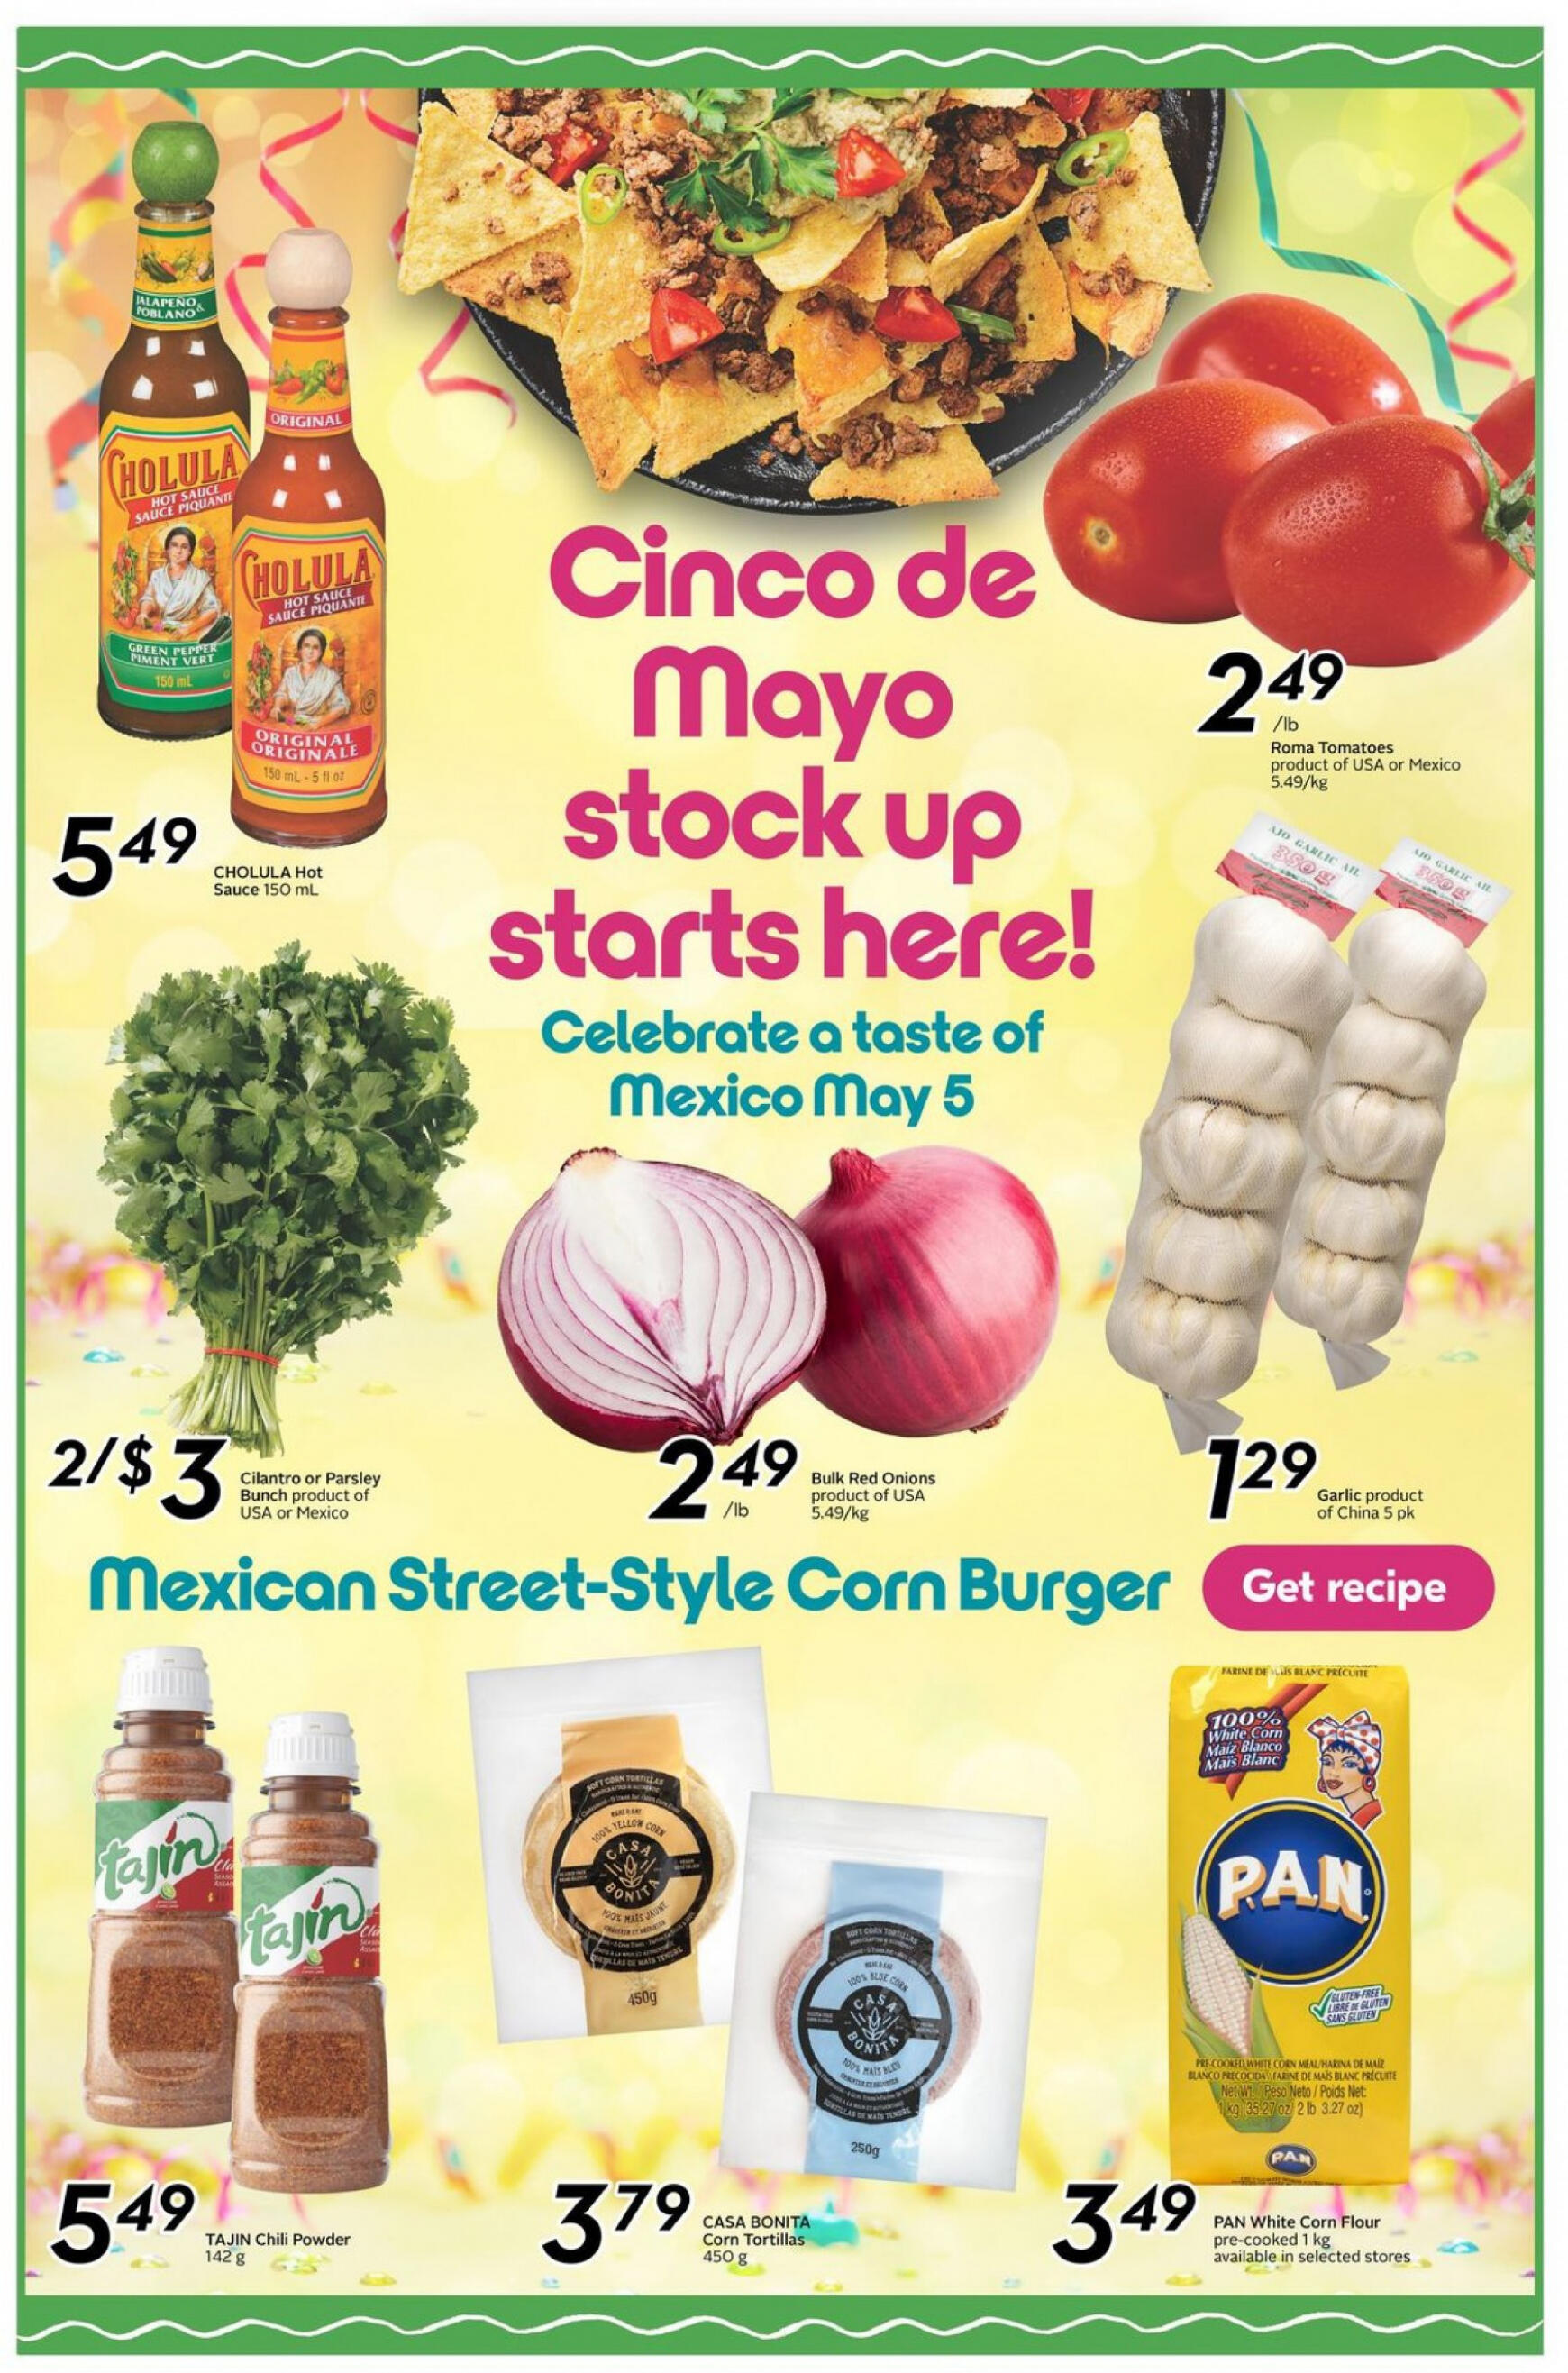 sobeys - Sobeys - Weekly Flyer - Ontario flyer current 02.05. - 08.05. - page: 12